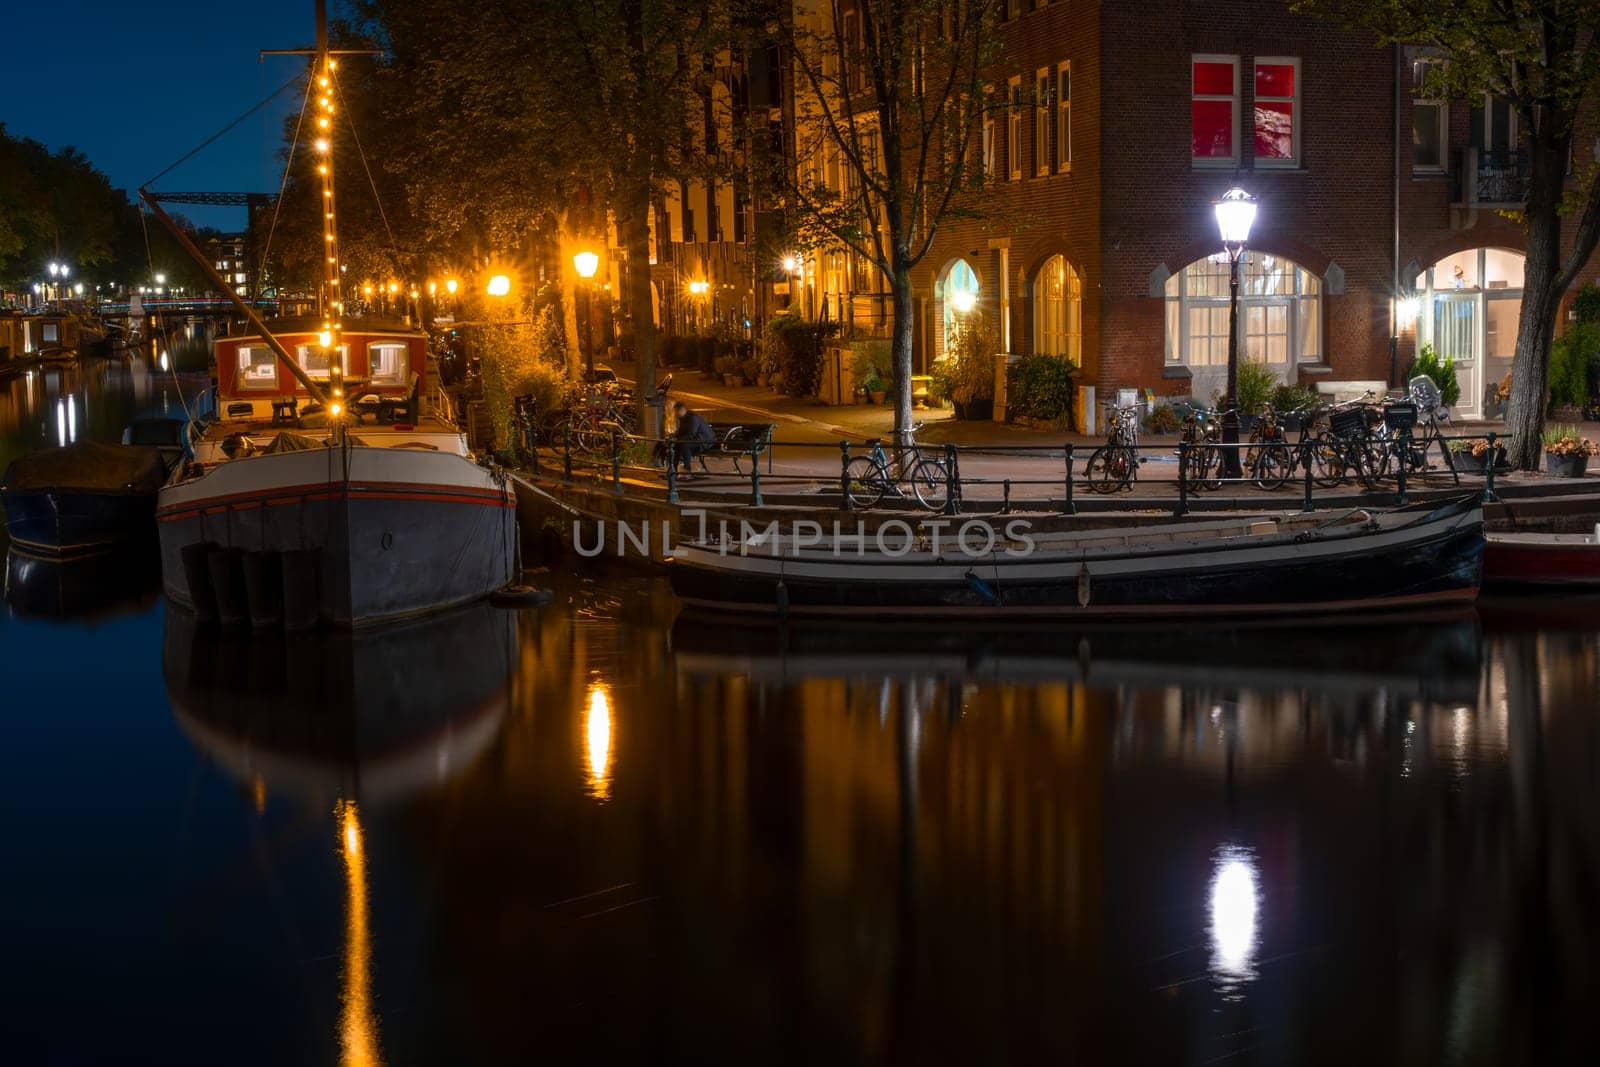 Netherlands. Summer night in Amsterdam. Canal quay with residential barges and bicycles